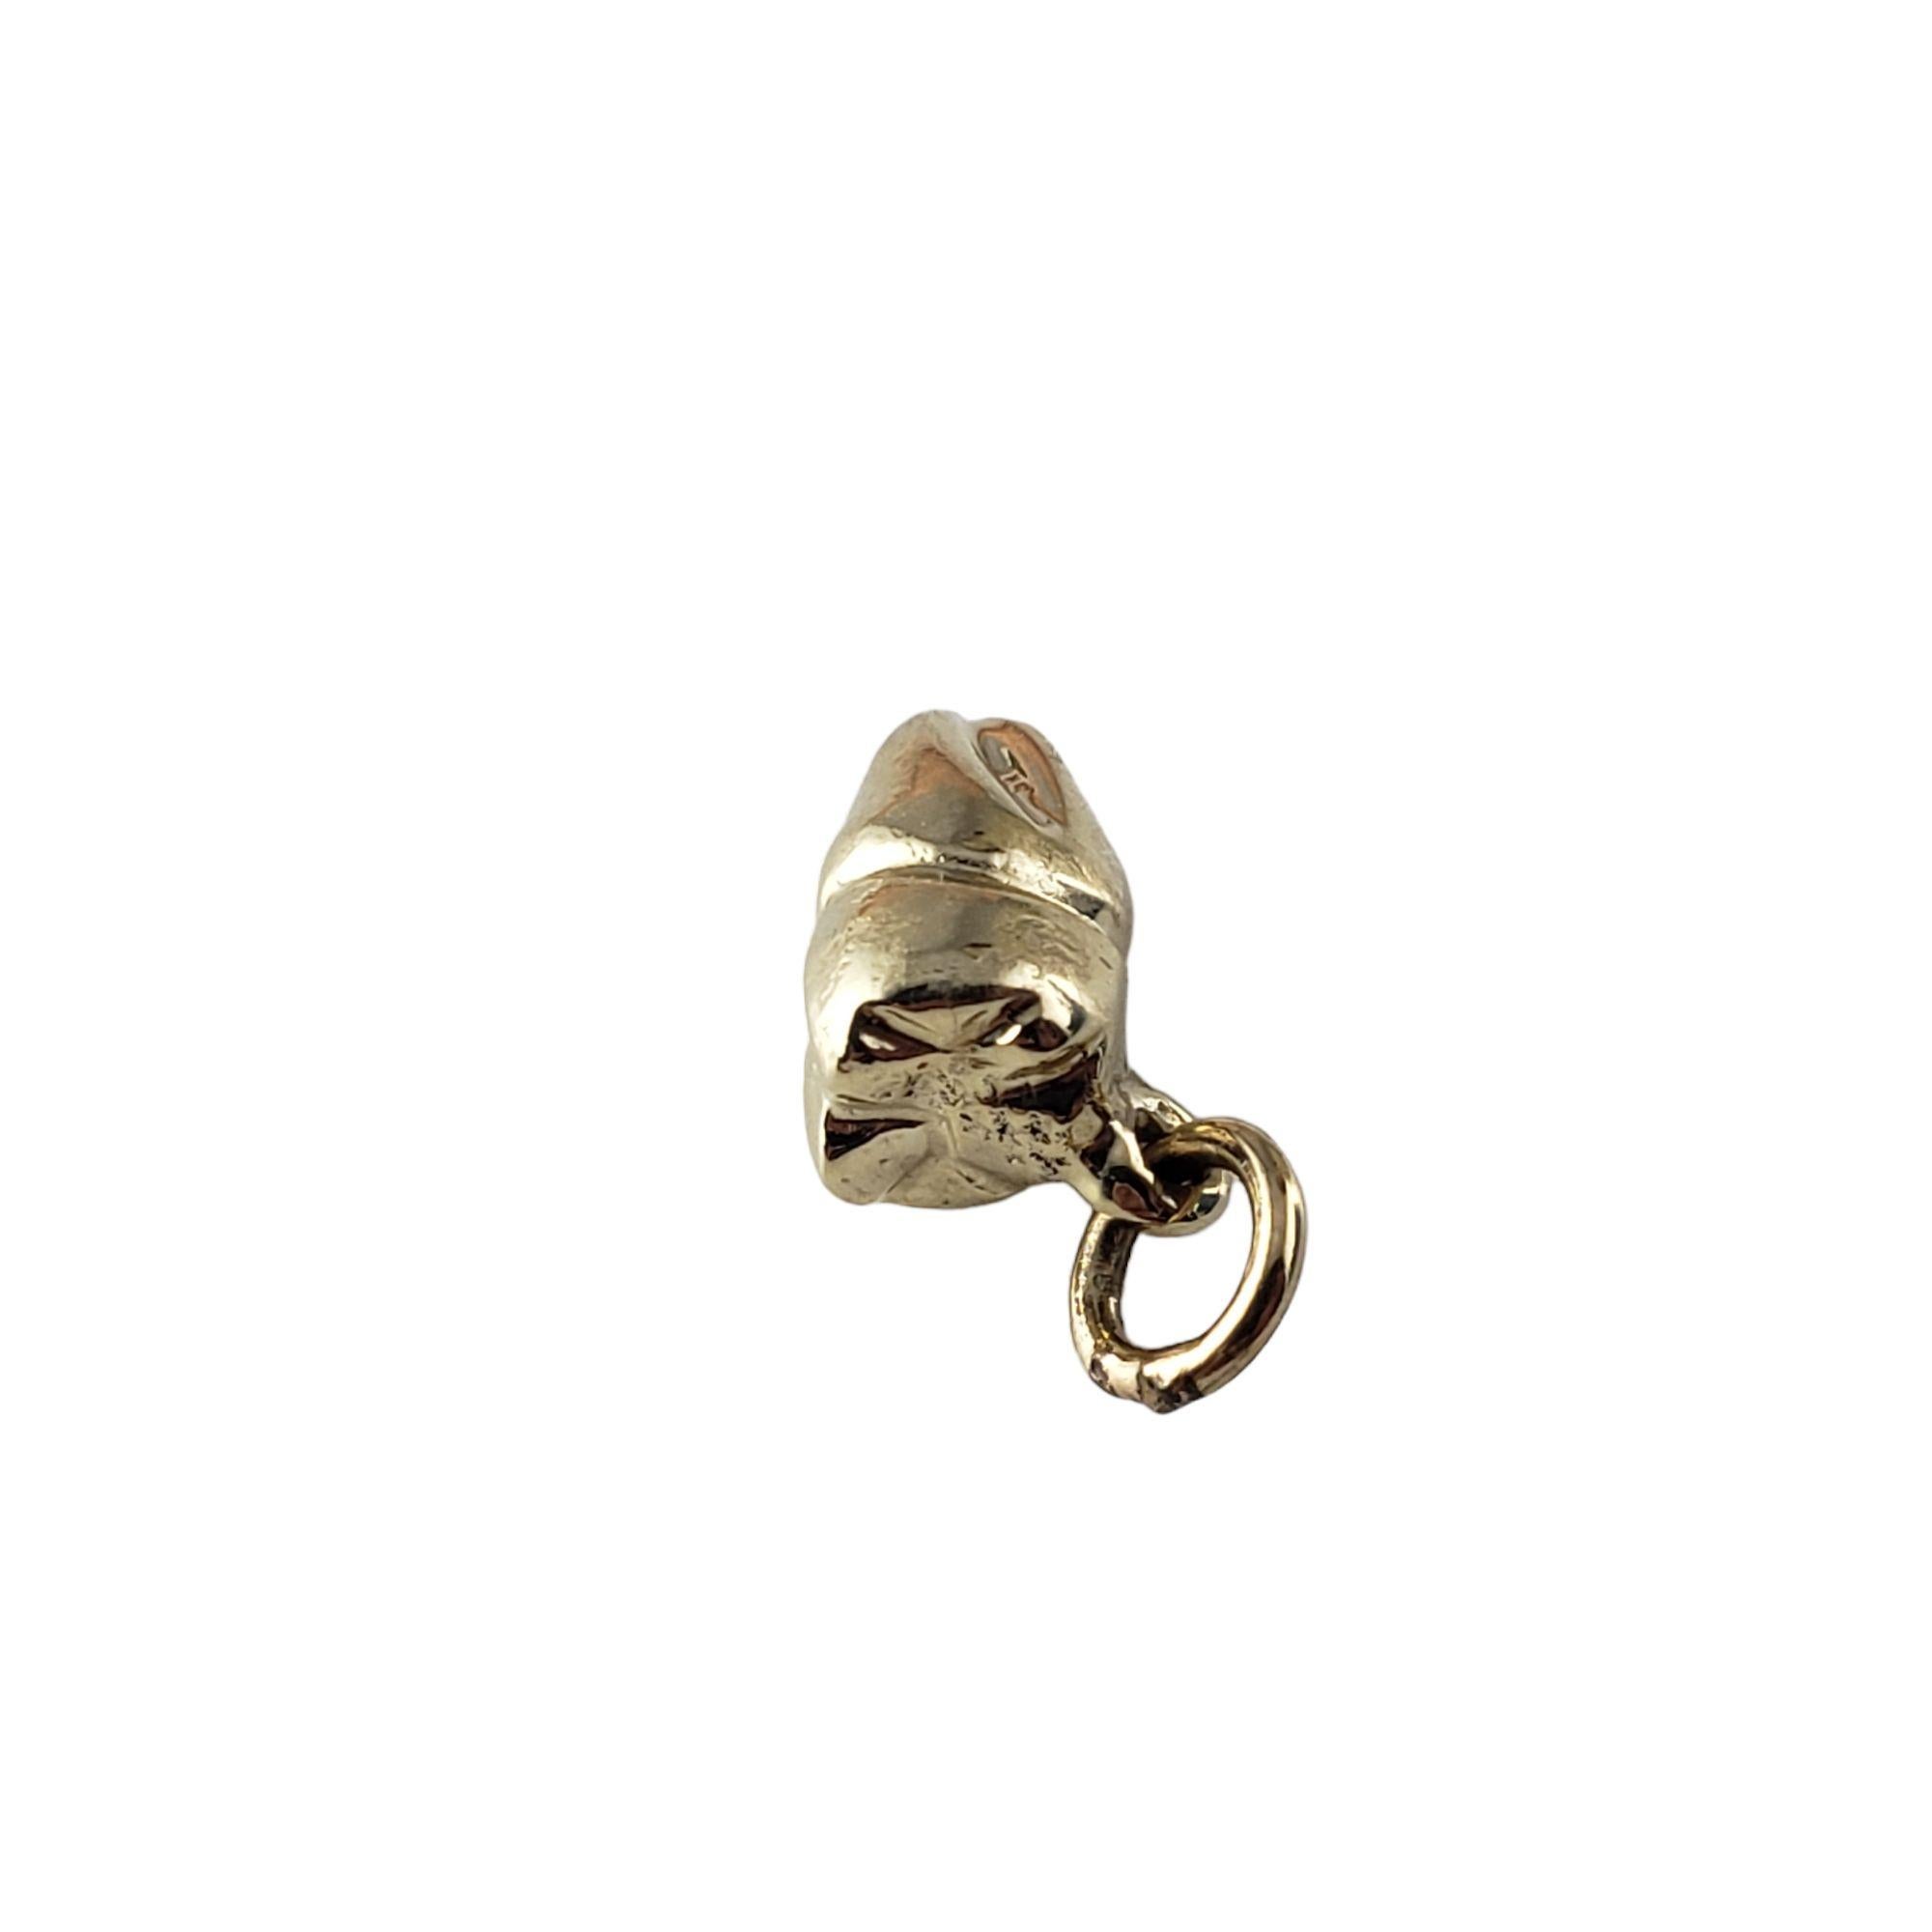 Vintage 14 Karat Yellow Gold Tooth Charm-

This 3D charm features a miniature tooth crafted in meticulously detailed 14K yellow gold.

Weight: 3.8 gr./ 2.4 dwt.

Size: 13 mm x 7 mm

Tested 14K gold.

Very good condition, professionally